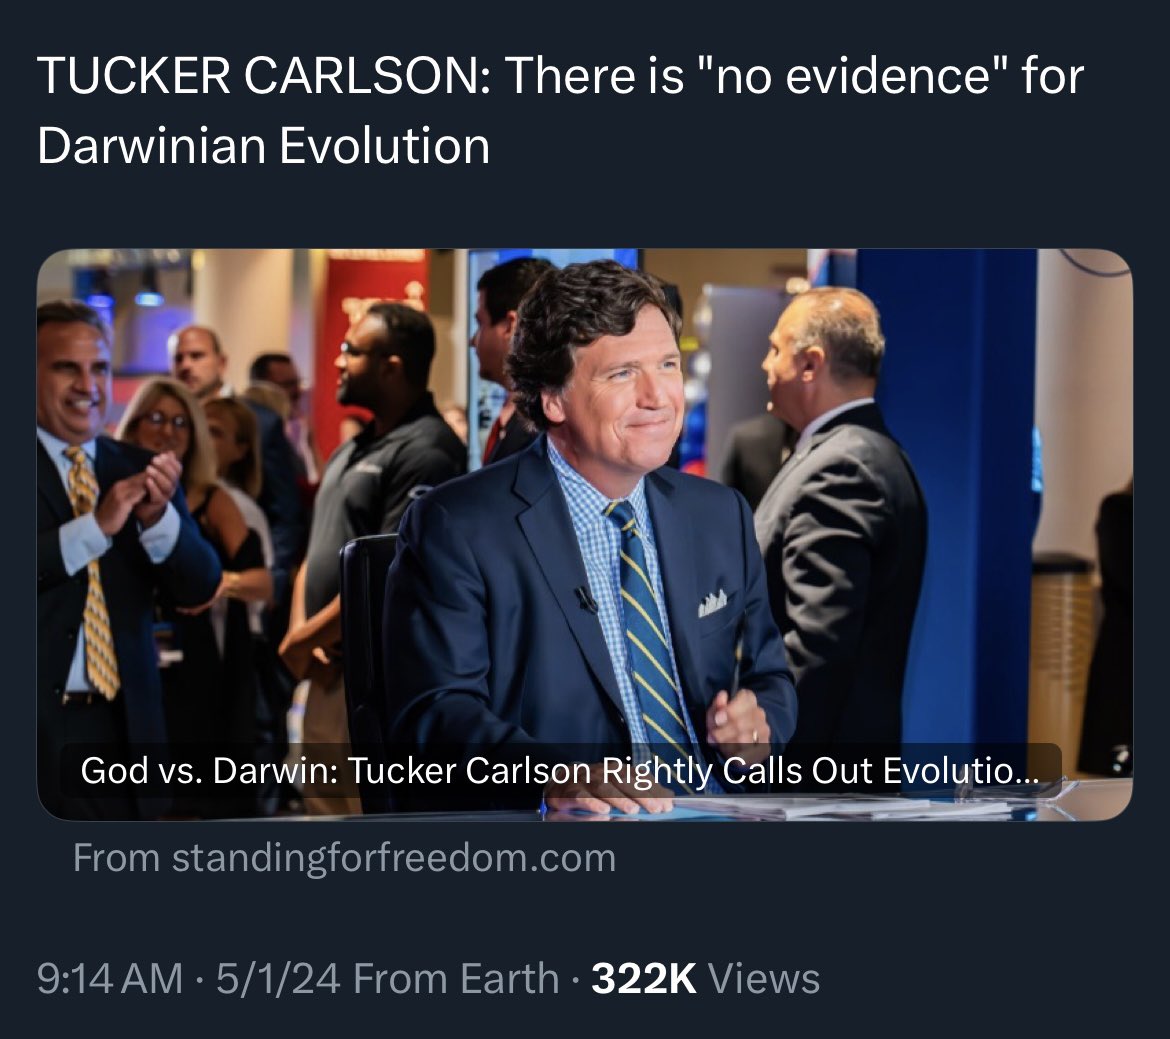 Darwinism is proved by fossil evidence, bio-geographical evidence and anatomical evidence. This is just more anti-Intellectualism that's being sold to MAGA to promote Christofascism.